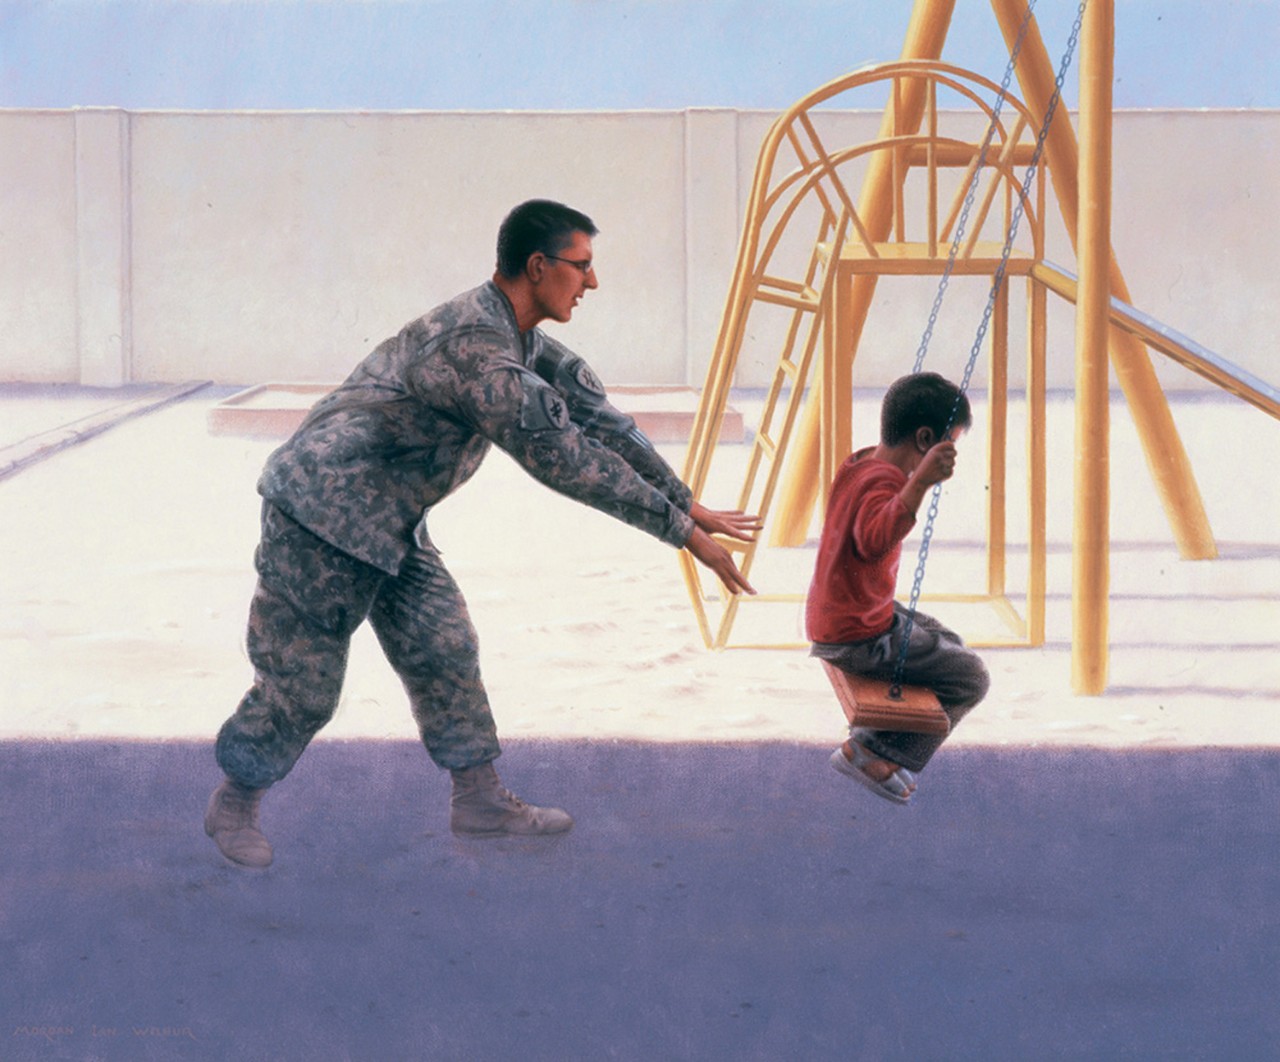 A man in uniform pushes a little boy on a playground swing